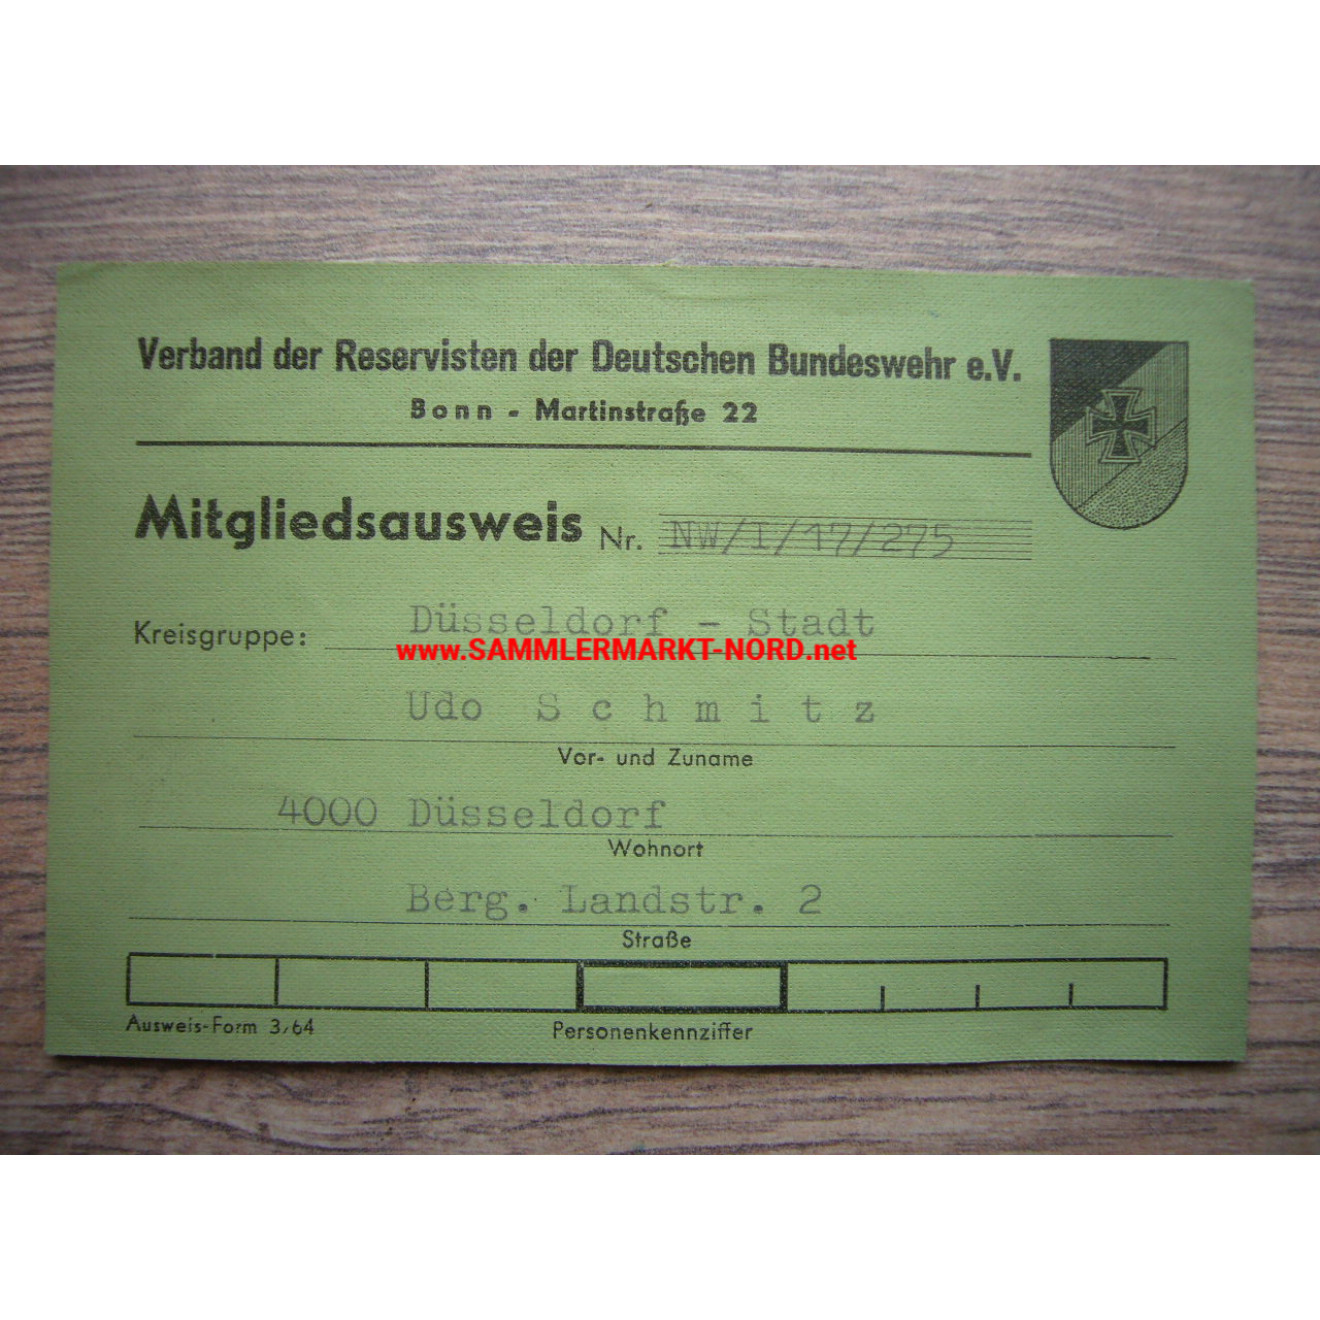 Association of Reservists of the German Armed Forces - Membership card